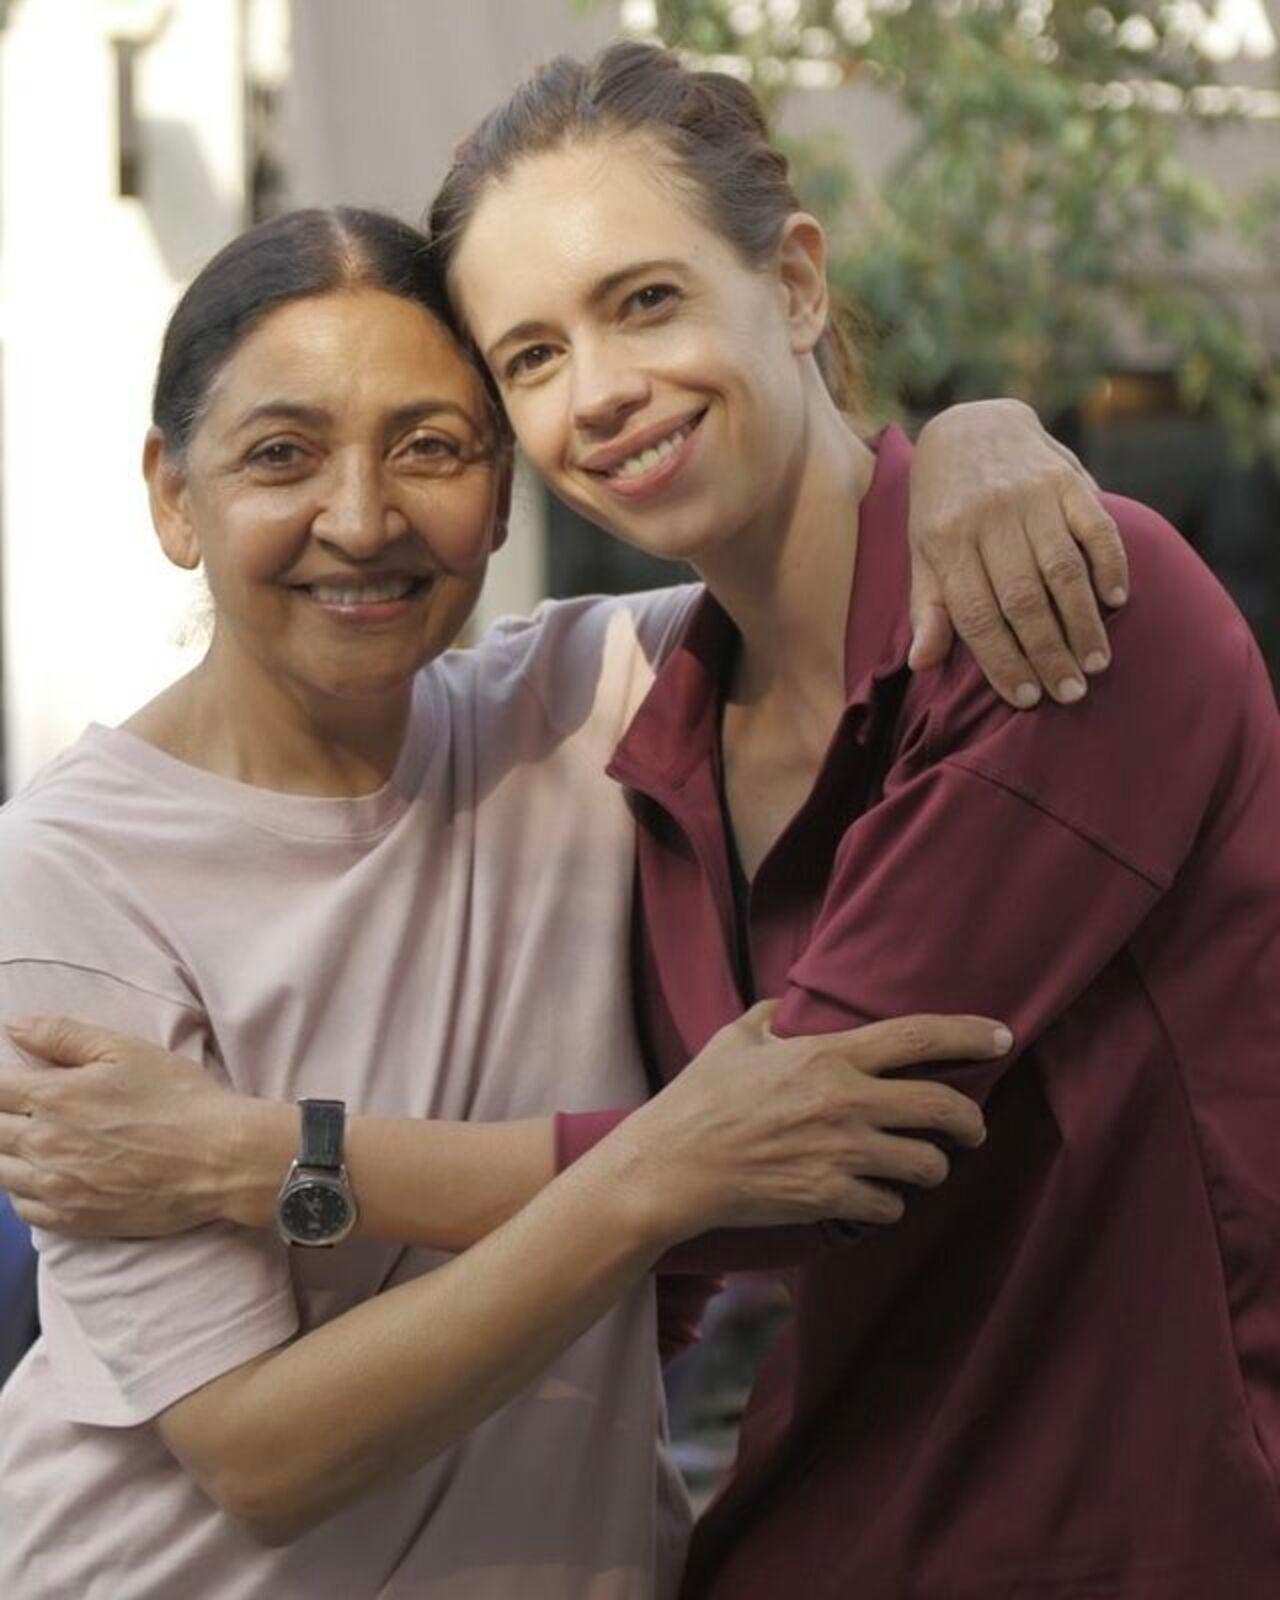 Deepti Naval
Deepti Naval has aged like fine wine and exudes timeless grace in every photo. In frame, she is with her with fellow 'Goldfish' co-star, Kalki Koechlin. 'Goldfish' revolves around an Alzheminer's riddled-mother and her complex relationship with her daughter. Deepti Naval said that she could personally resonate deeply with her character because of her real-life tryst with the disease